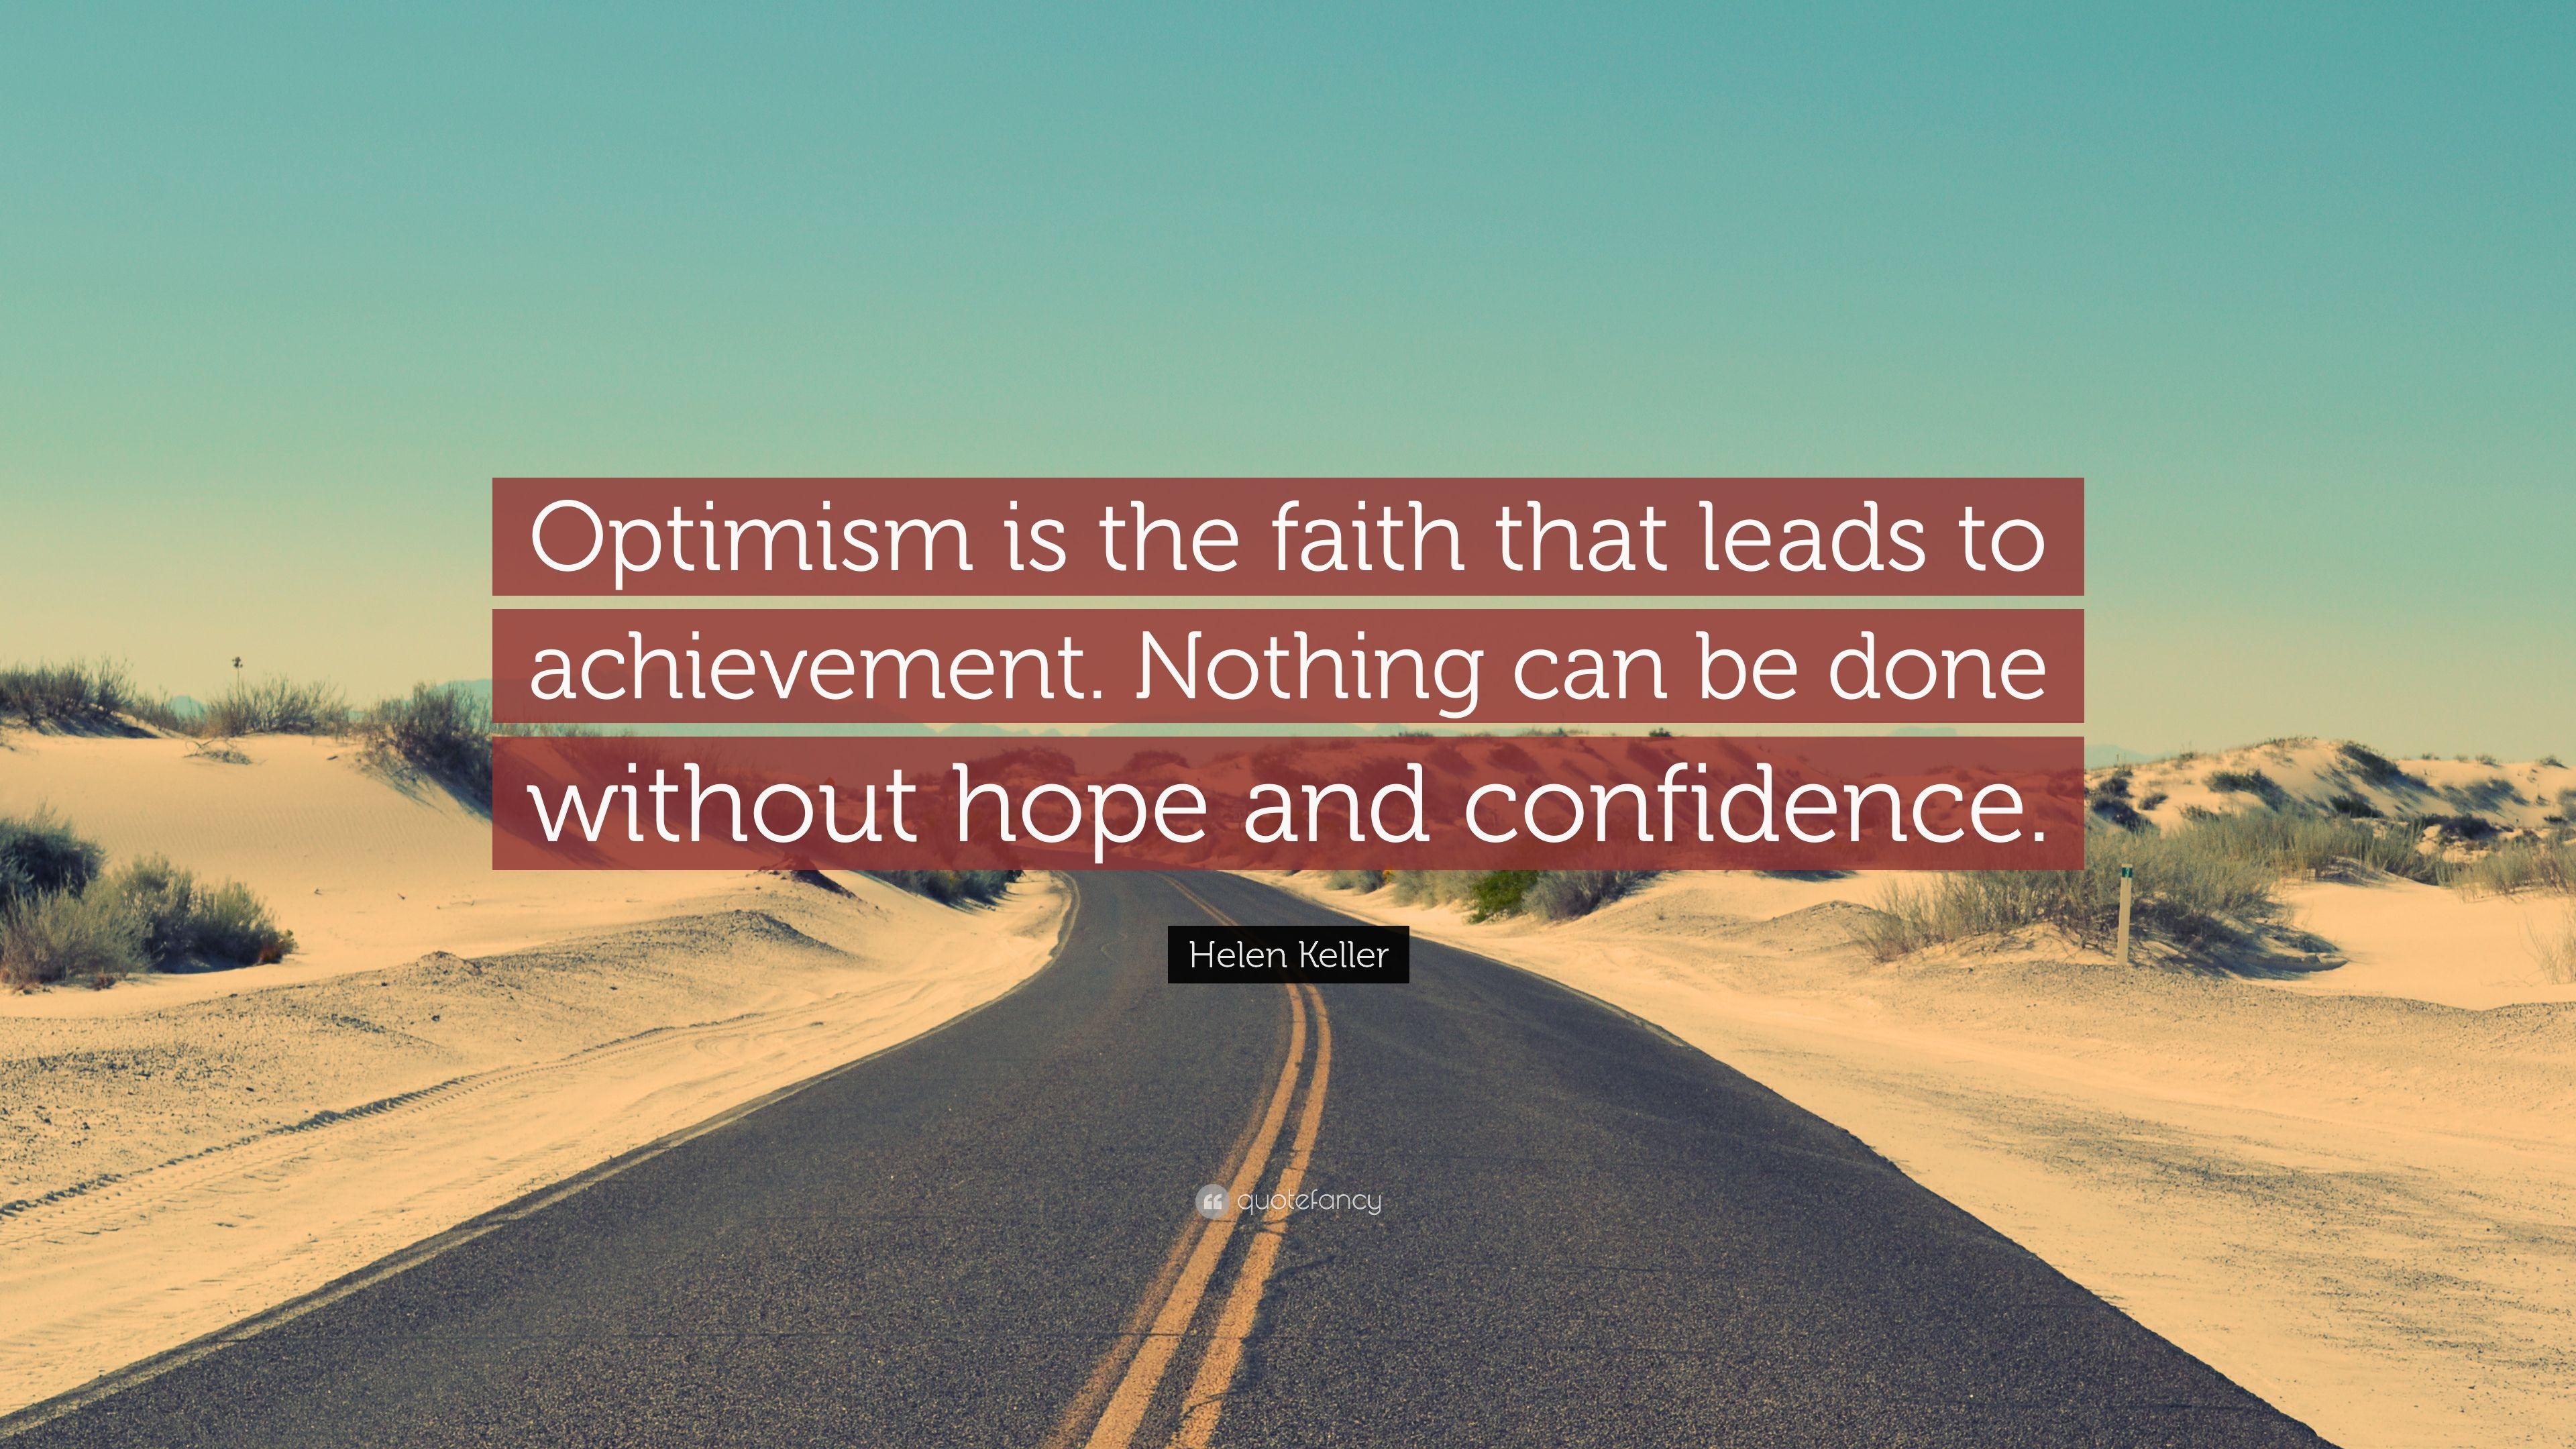 Helen Keller Quote: “Optimism is the faith that leads to achievement